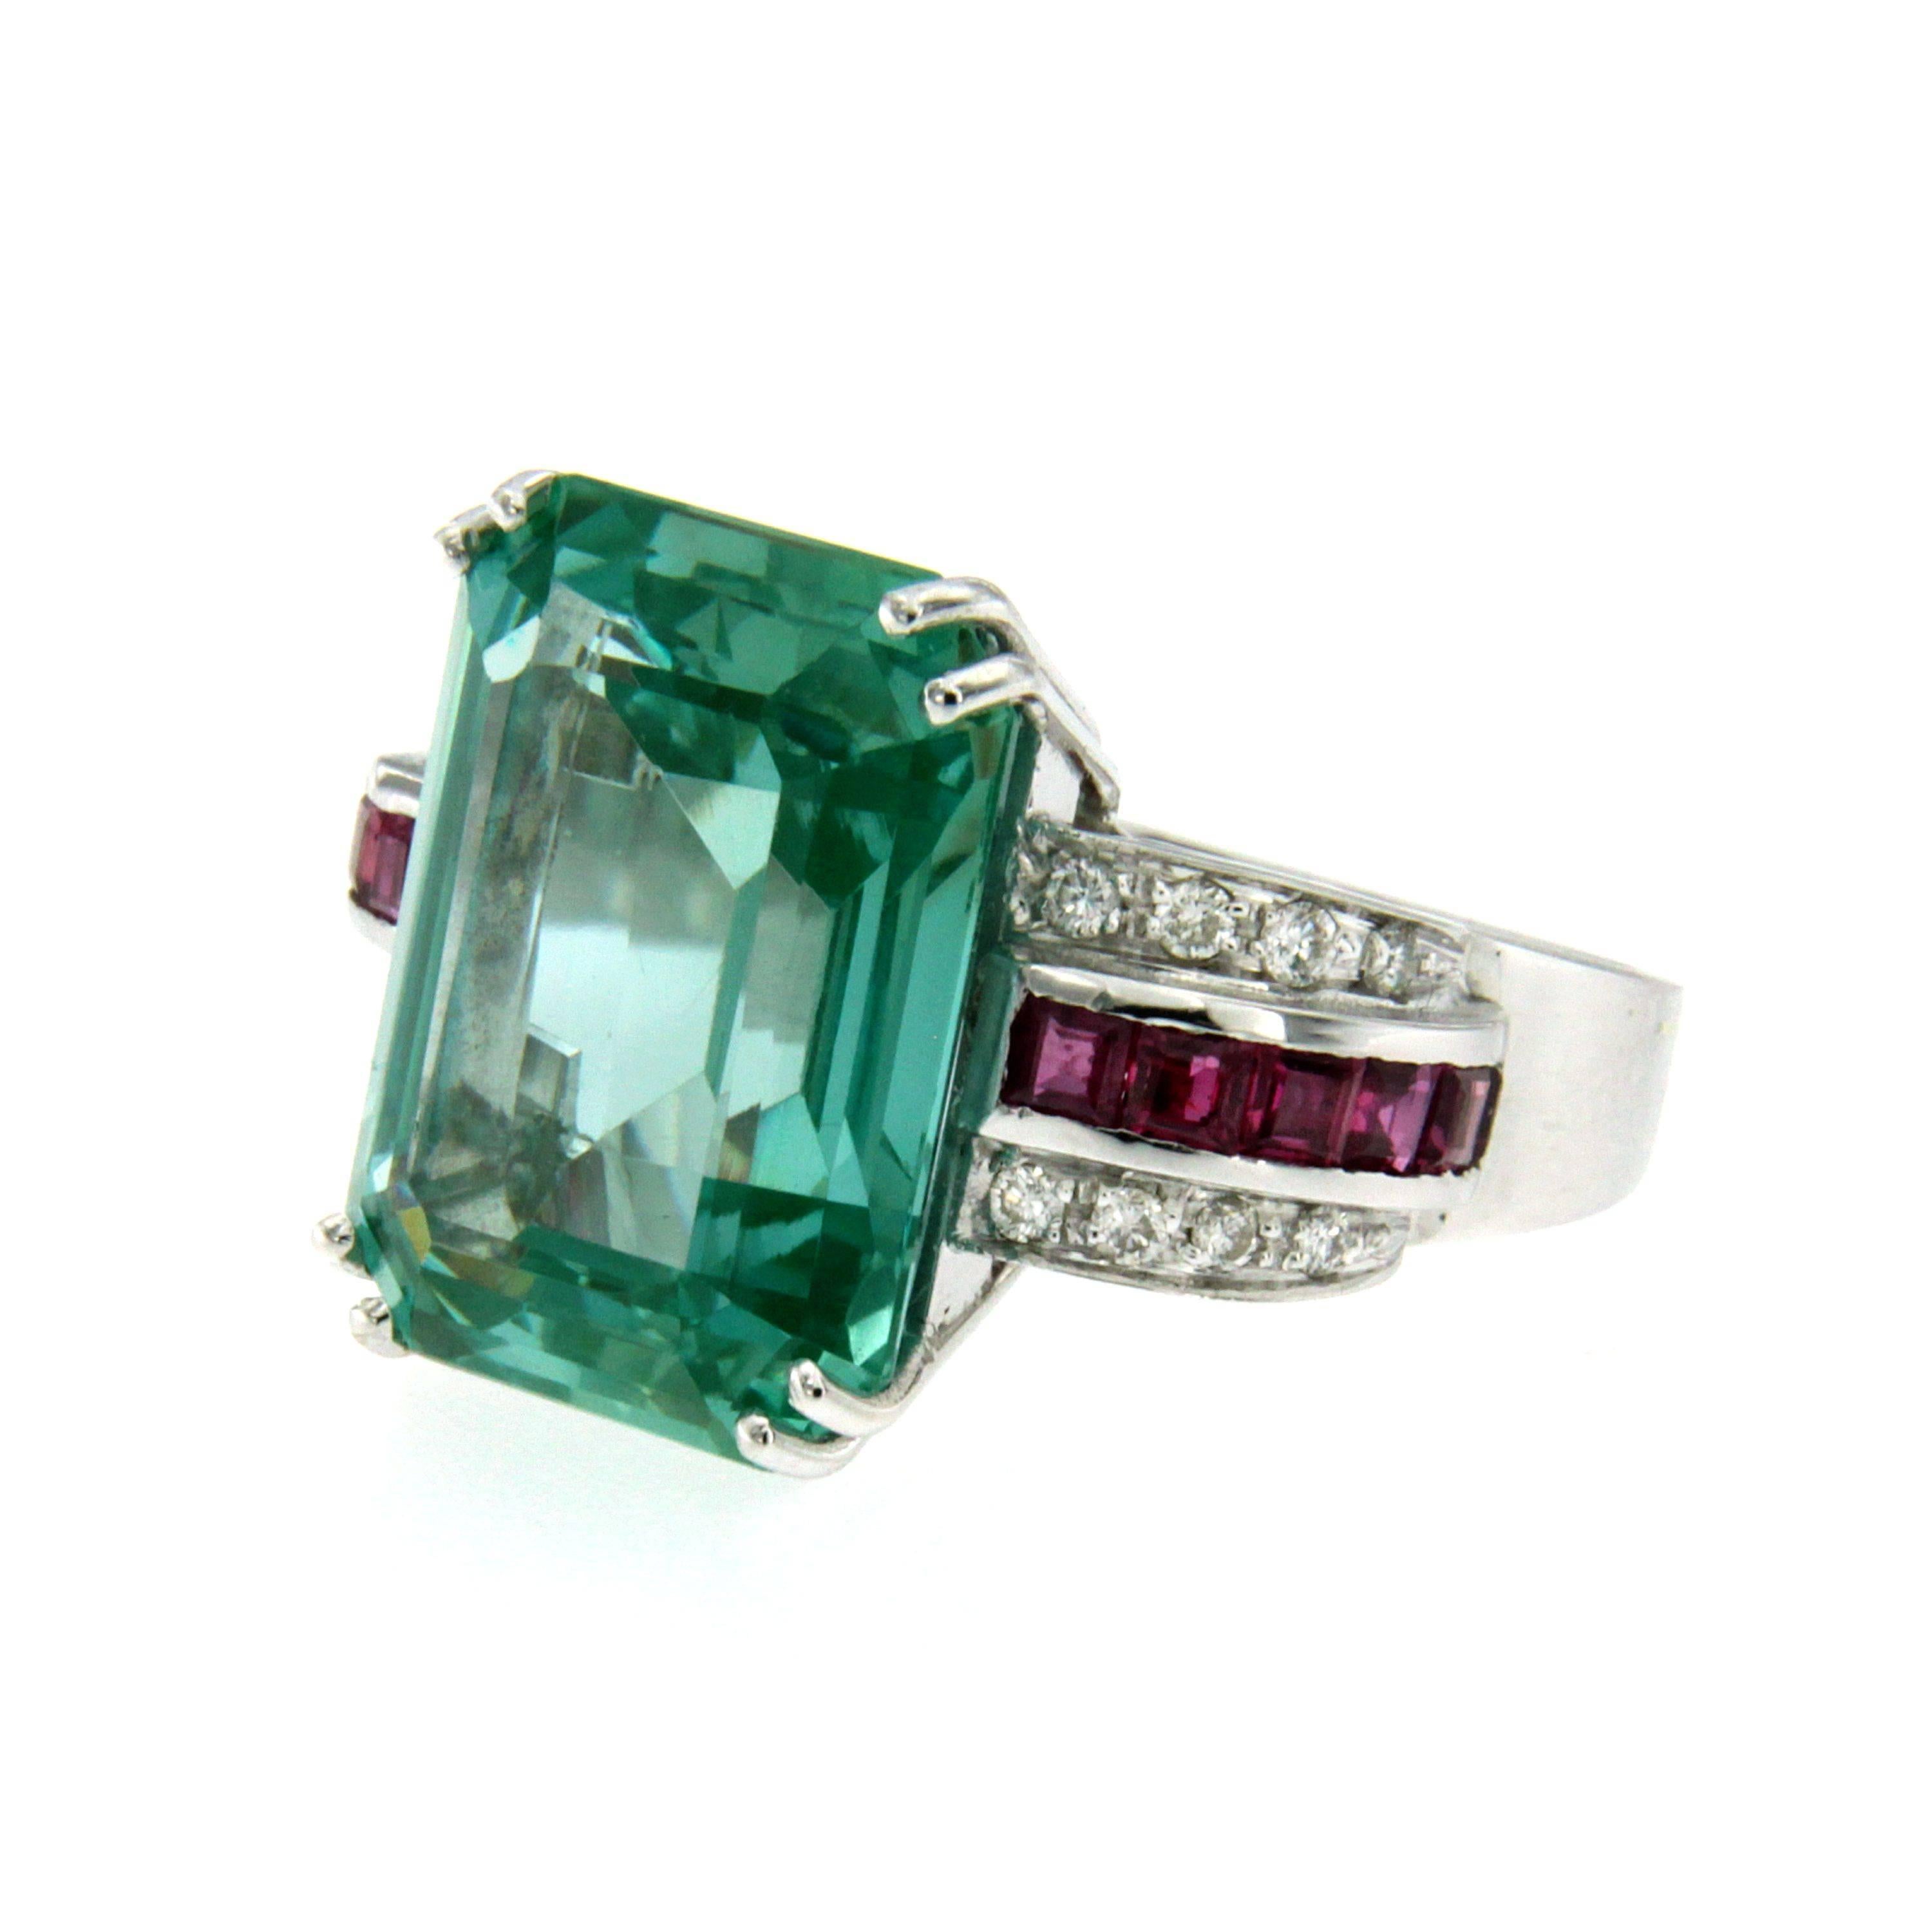 Stunning gold ring of great quality dates 1940, origin Italy, all handmade.

It is set in the center with a wide, rare and beautiful natural Green Aquamarine approx. 9 carats, and surrounded by approx. 1.20 carat of fine custom cut Rubies and 0,40